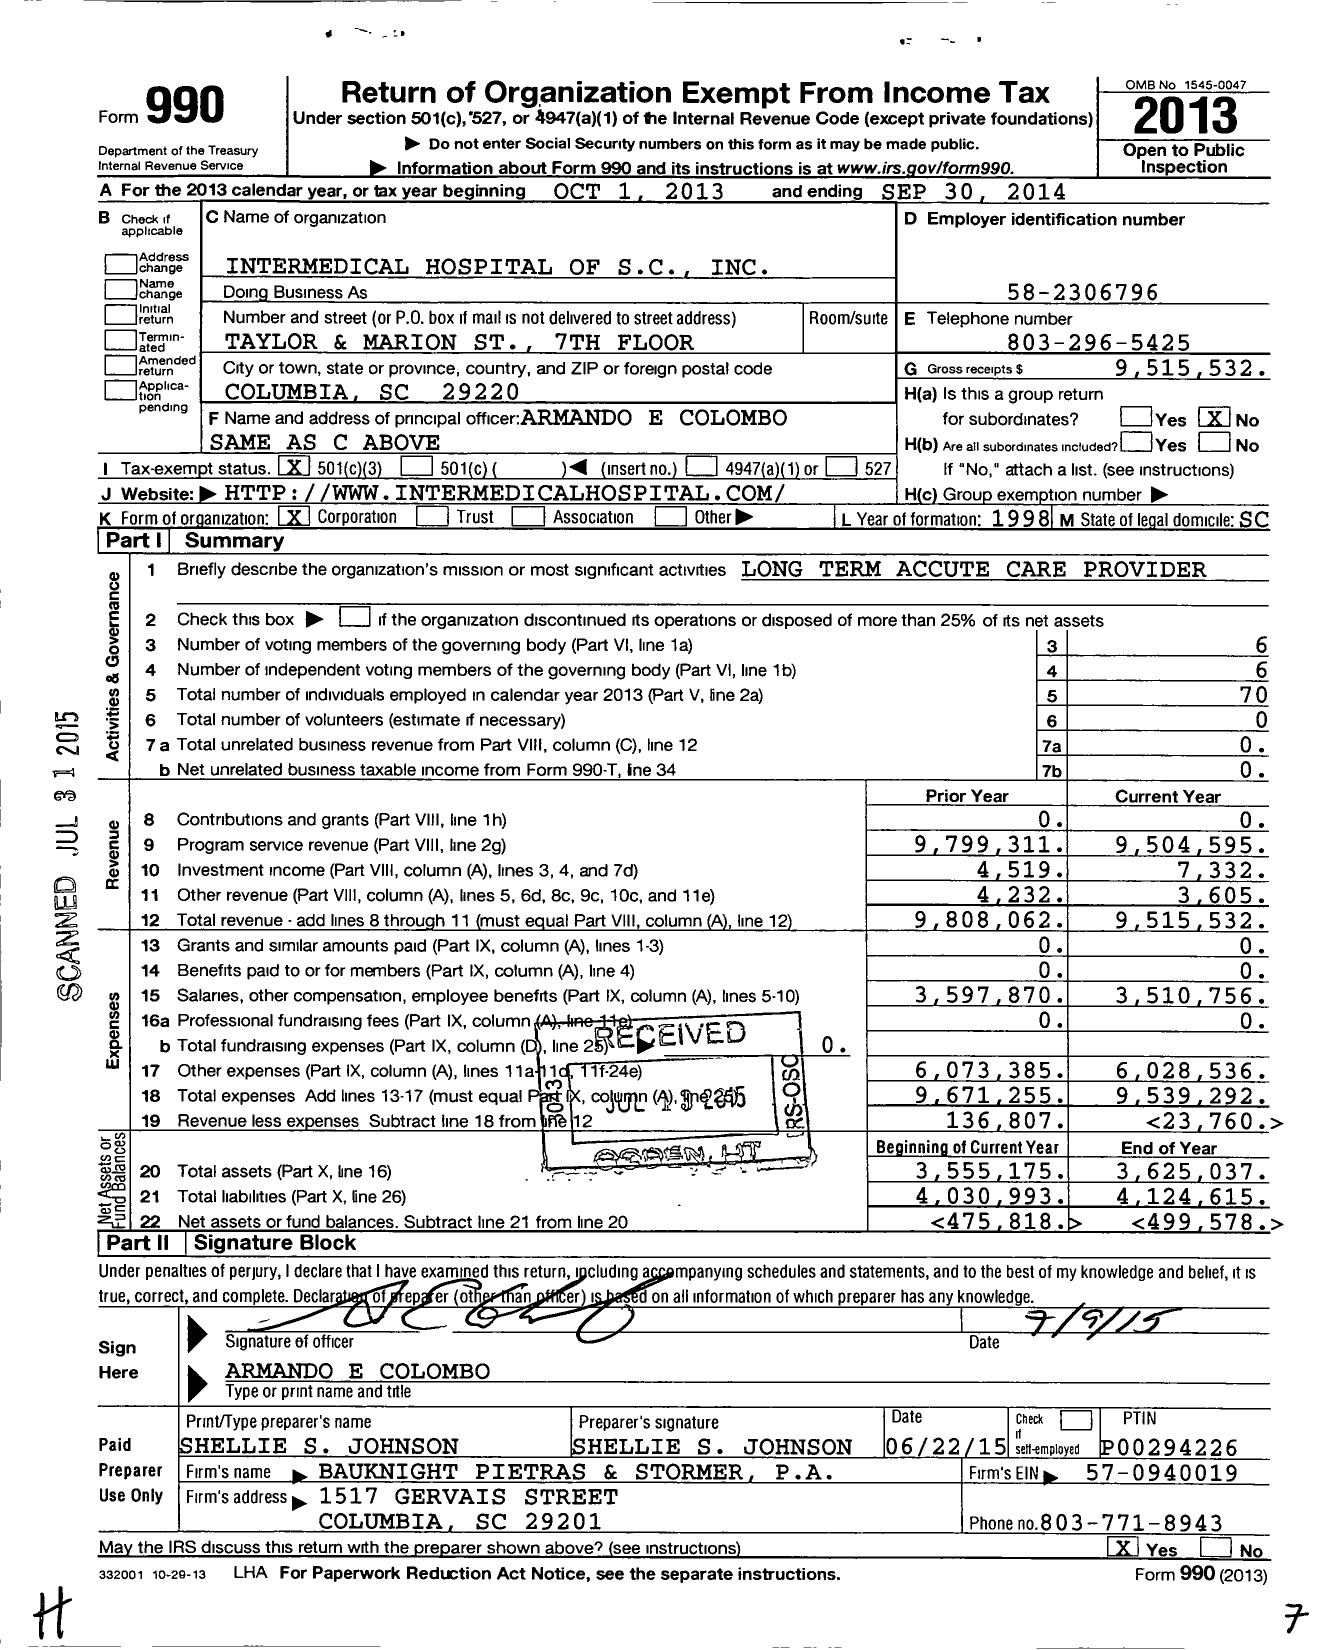 Image of first page of 2013 Form 990 for Intermedical Hospital of SC